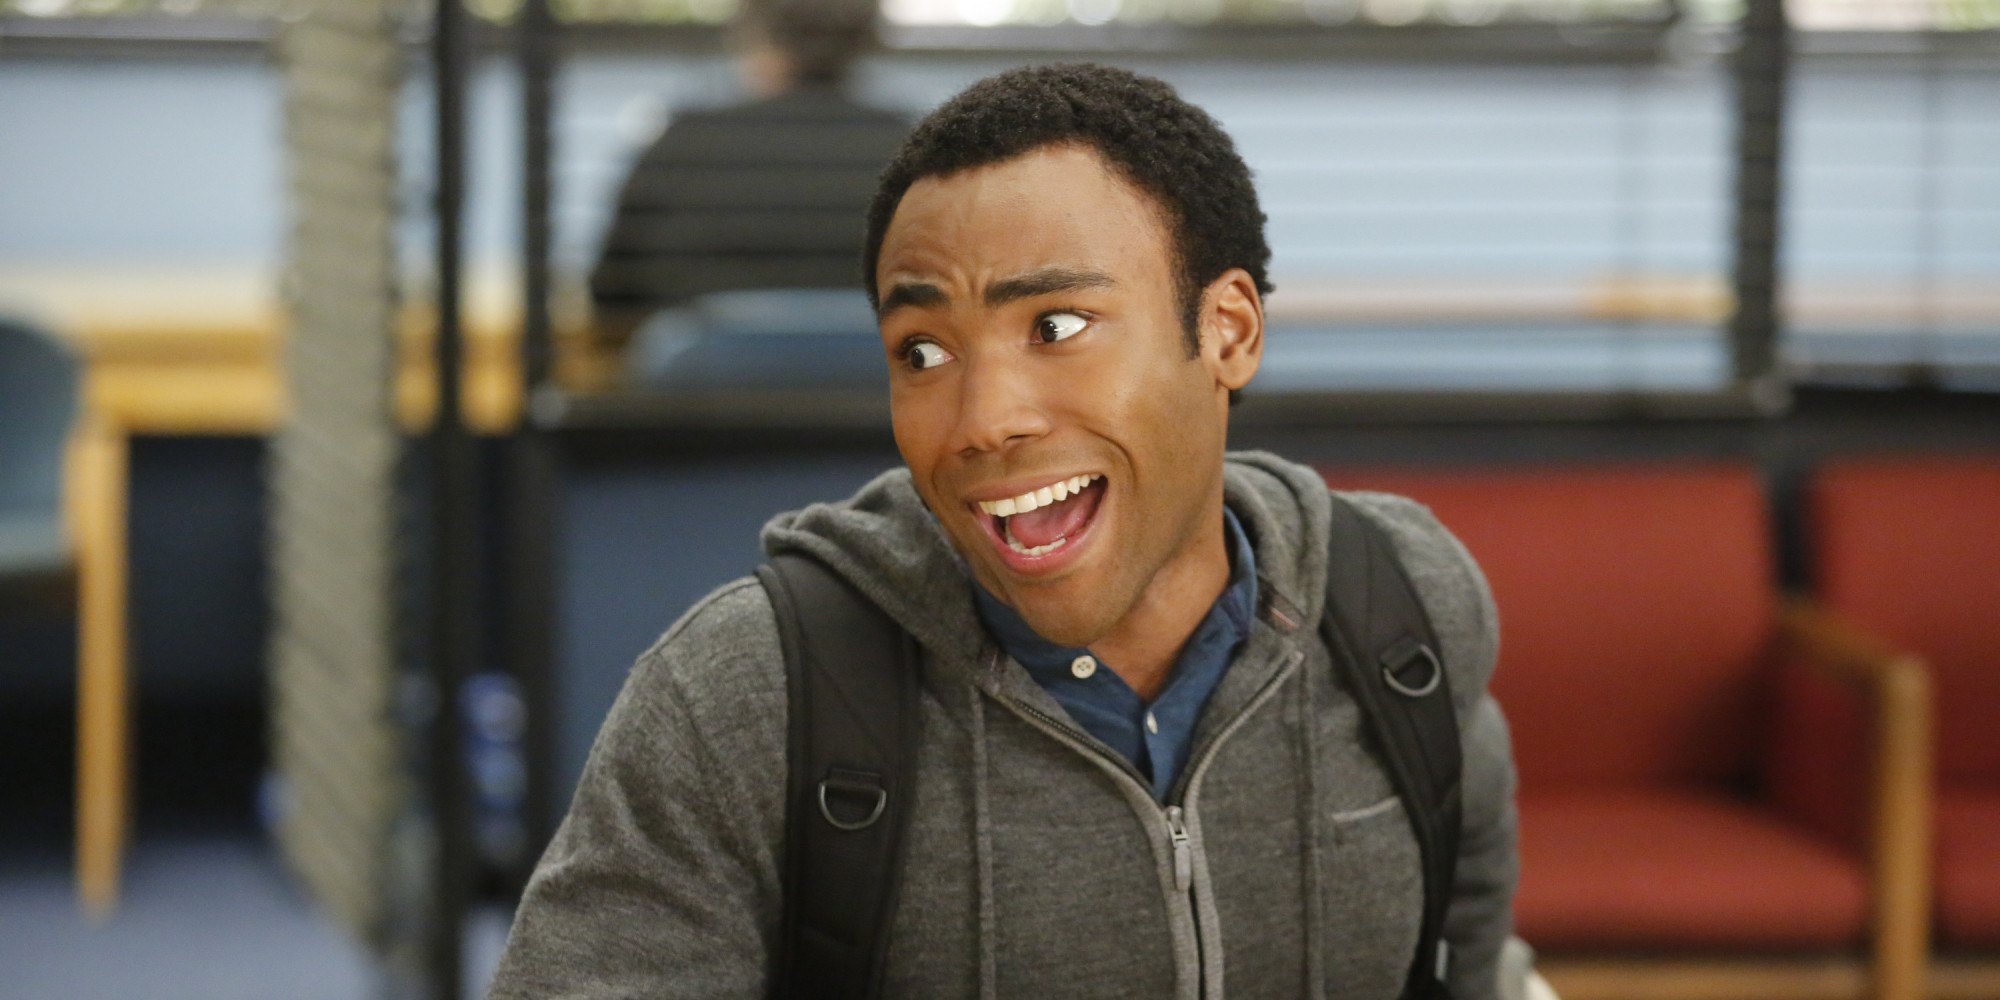 ‘Community’: Why Donald Glover Struggled With His Time on the Hit Show